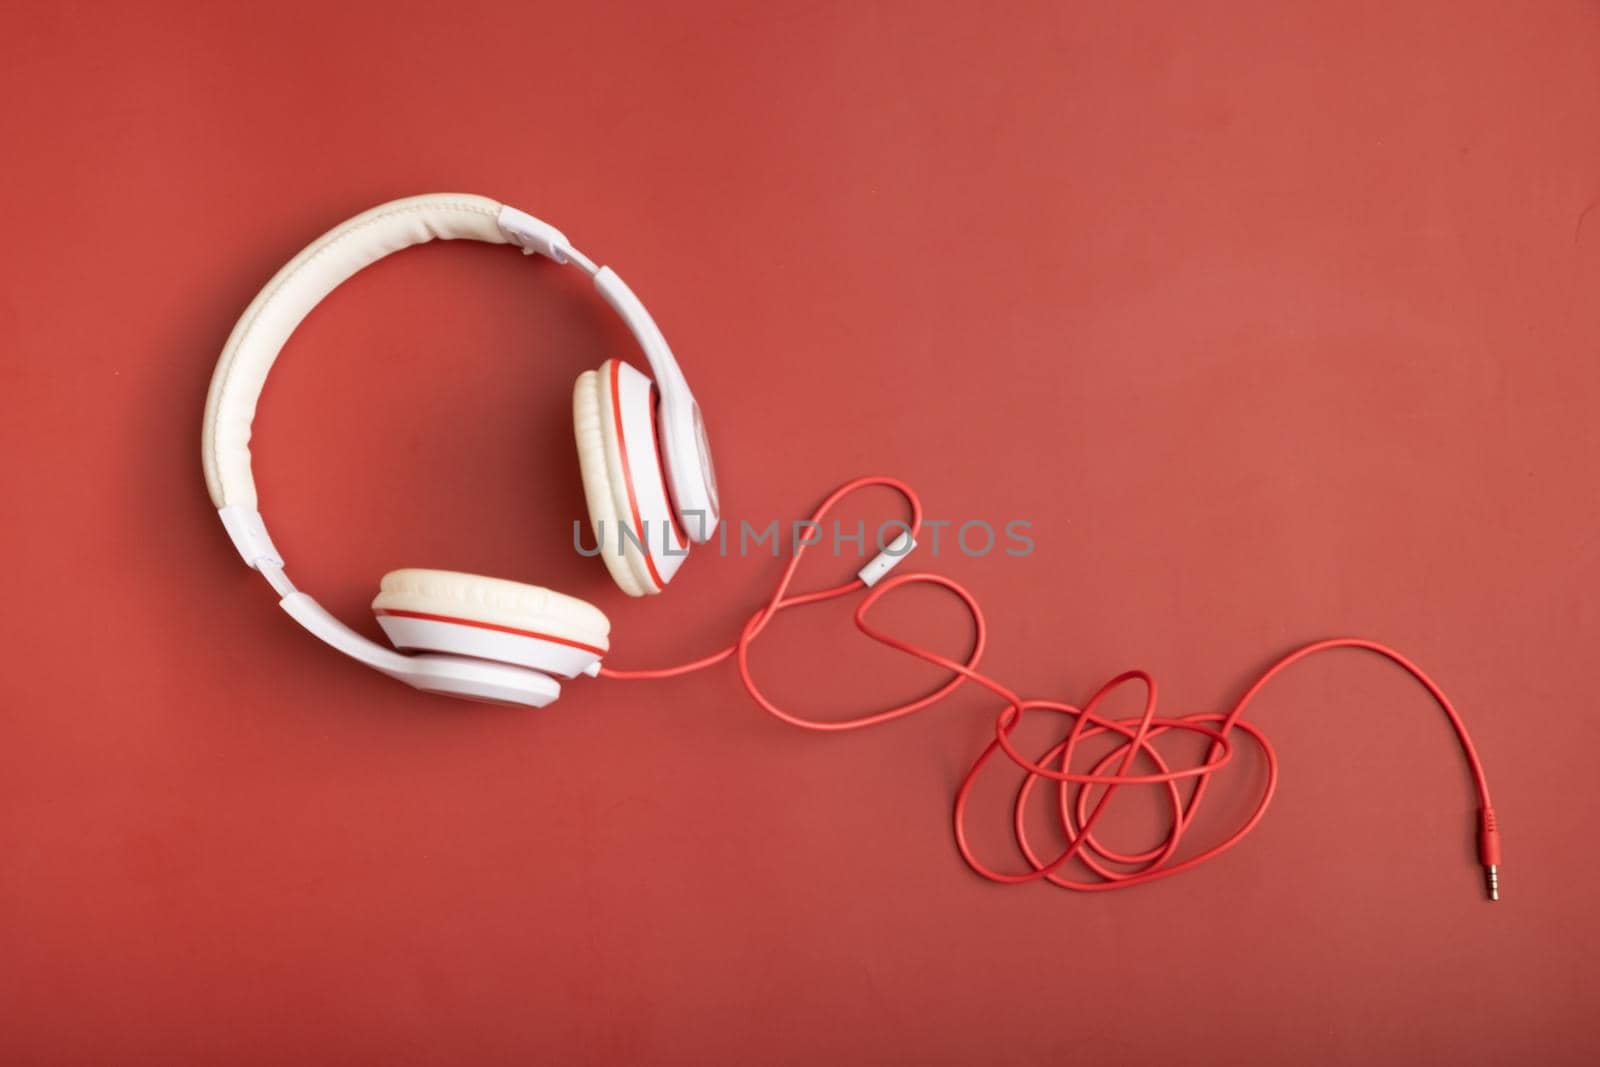 White-colored headphones on red background. Minimalistic fashion music concept. Top view, flat lay.